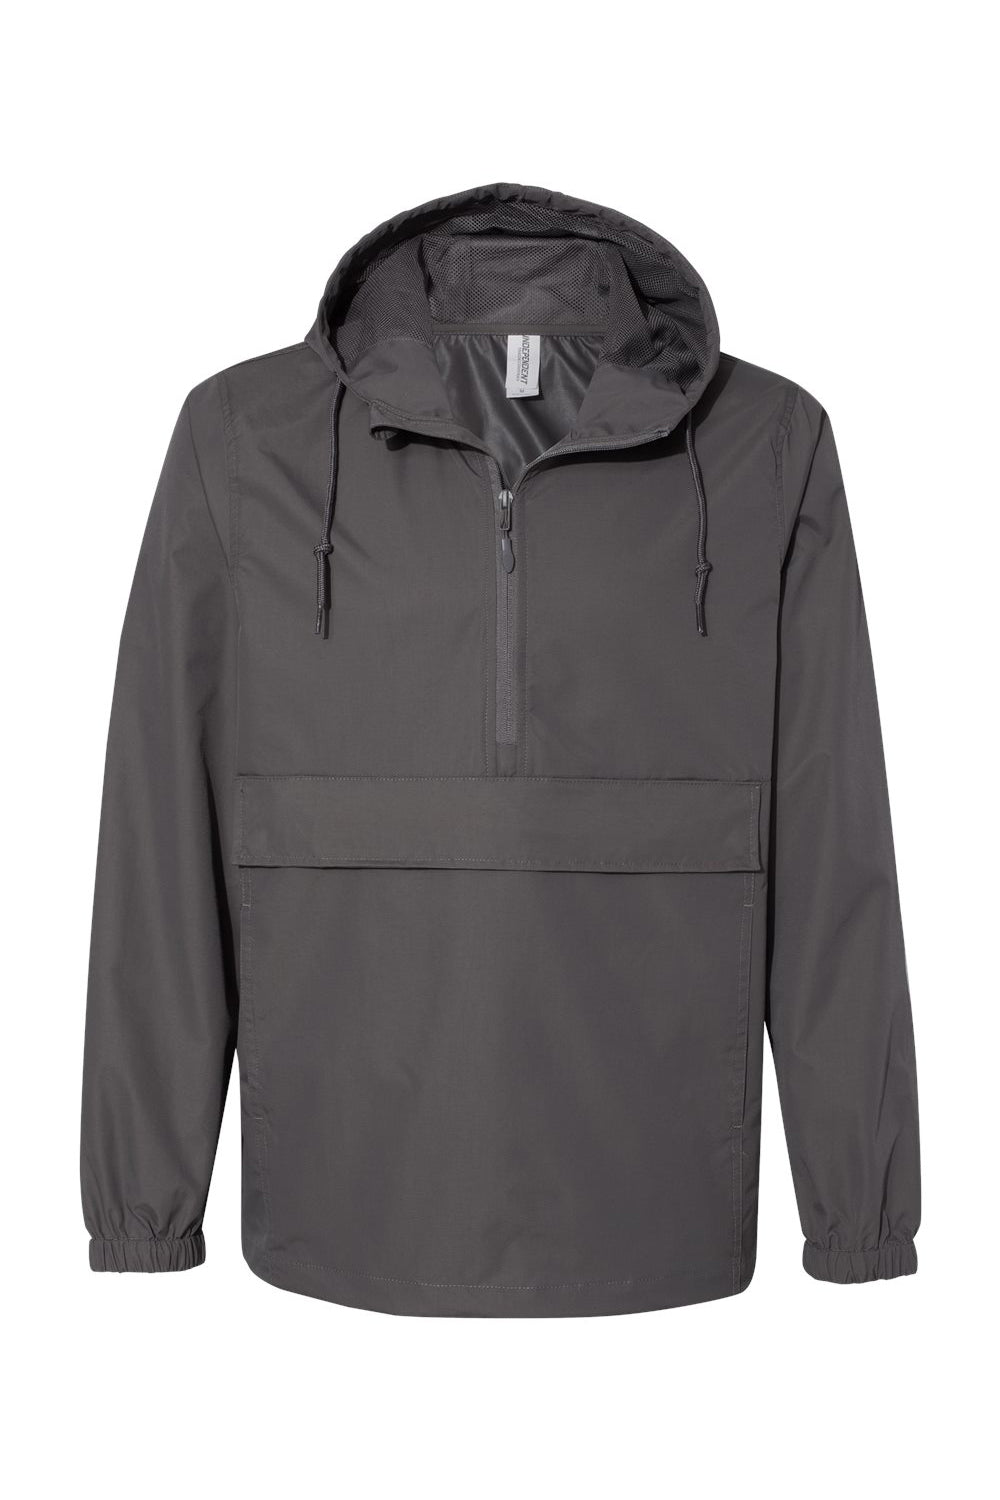 Independent Trading Co. EXP94NAW Mens Nylon Hooded Anorak Jacket Graphite Grey Flat Front